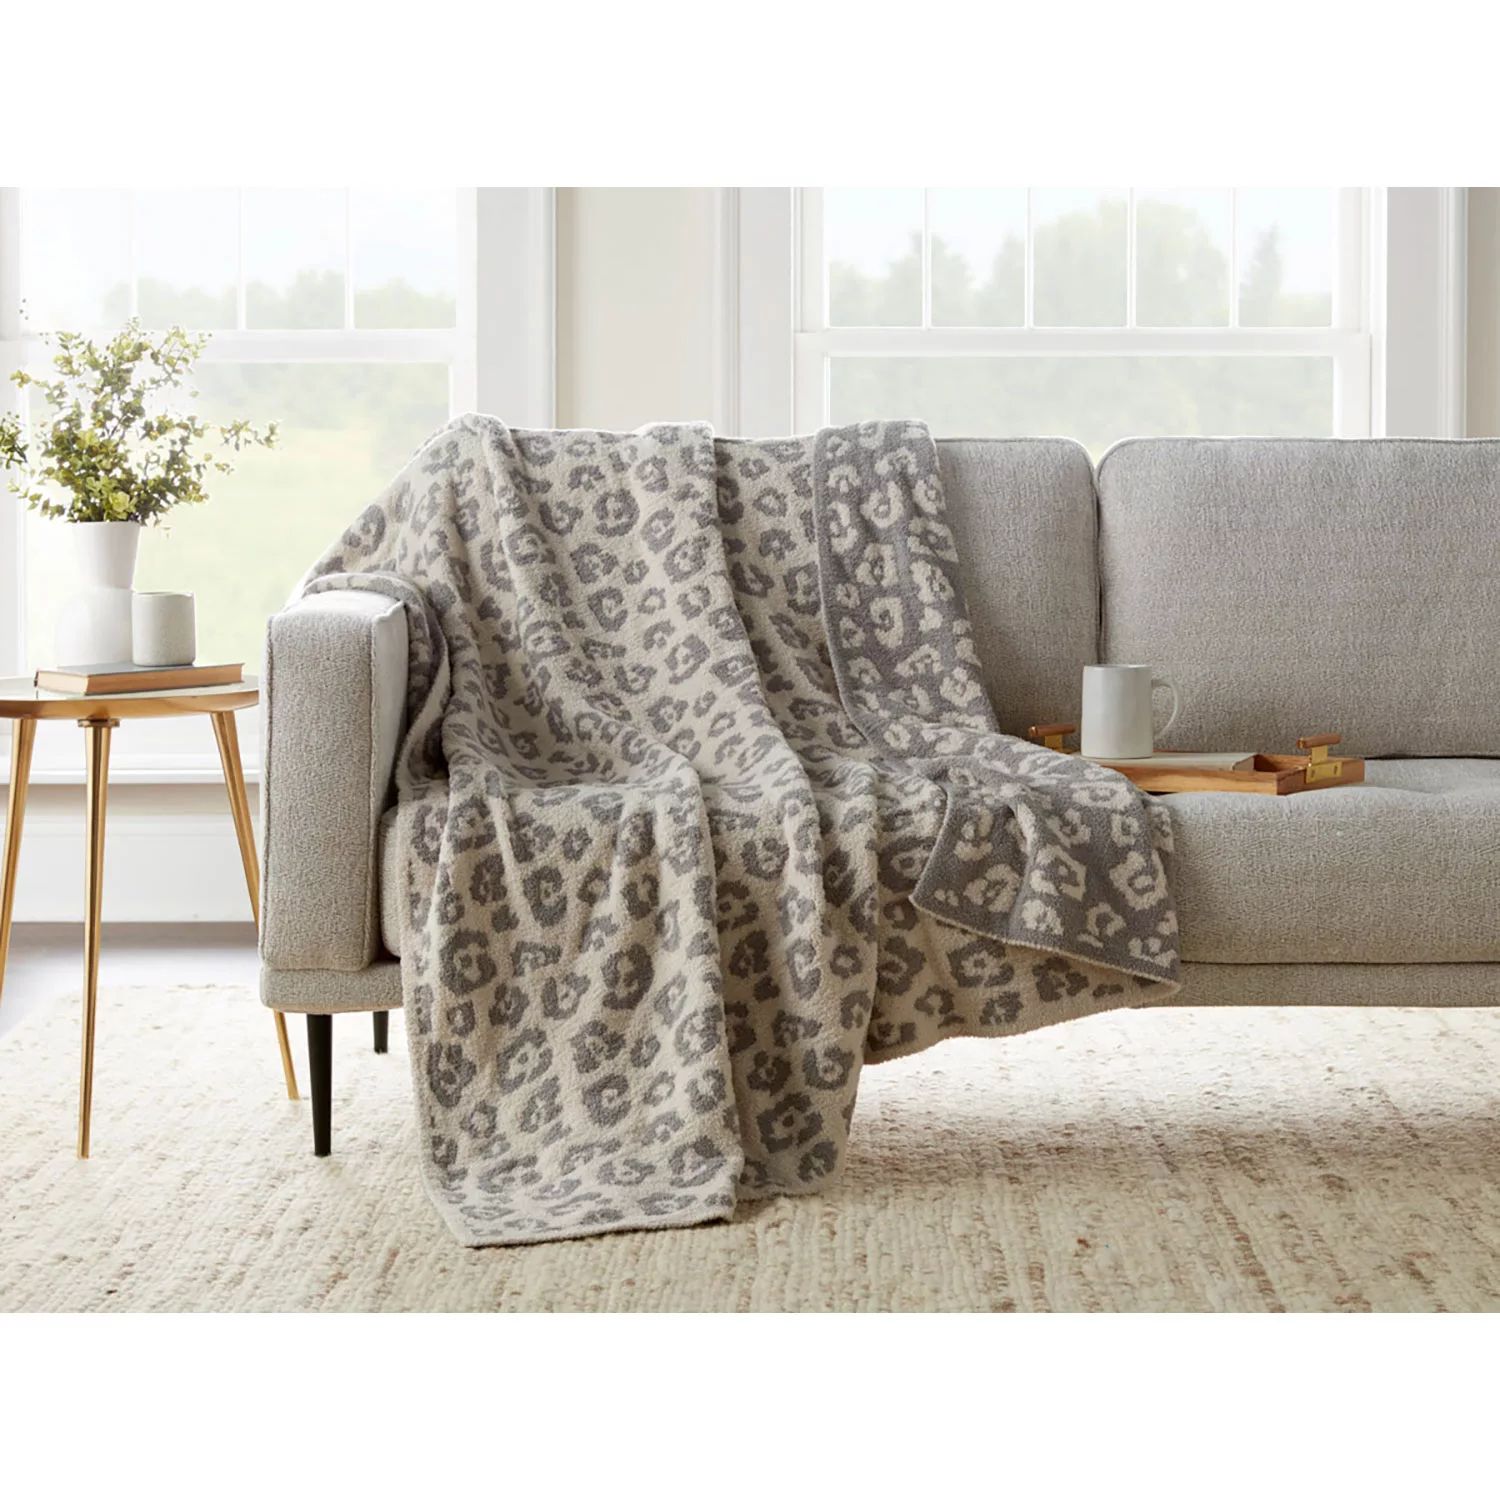 Member’s Mark Luxury Premier Collection Cozy Knit Animal Print Throw (Assorted Colors) | Sam's Club